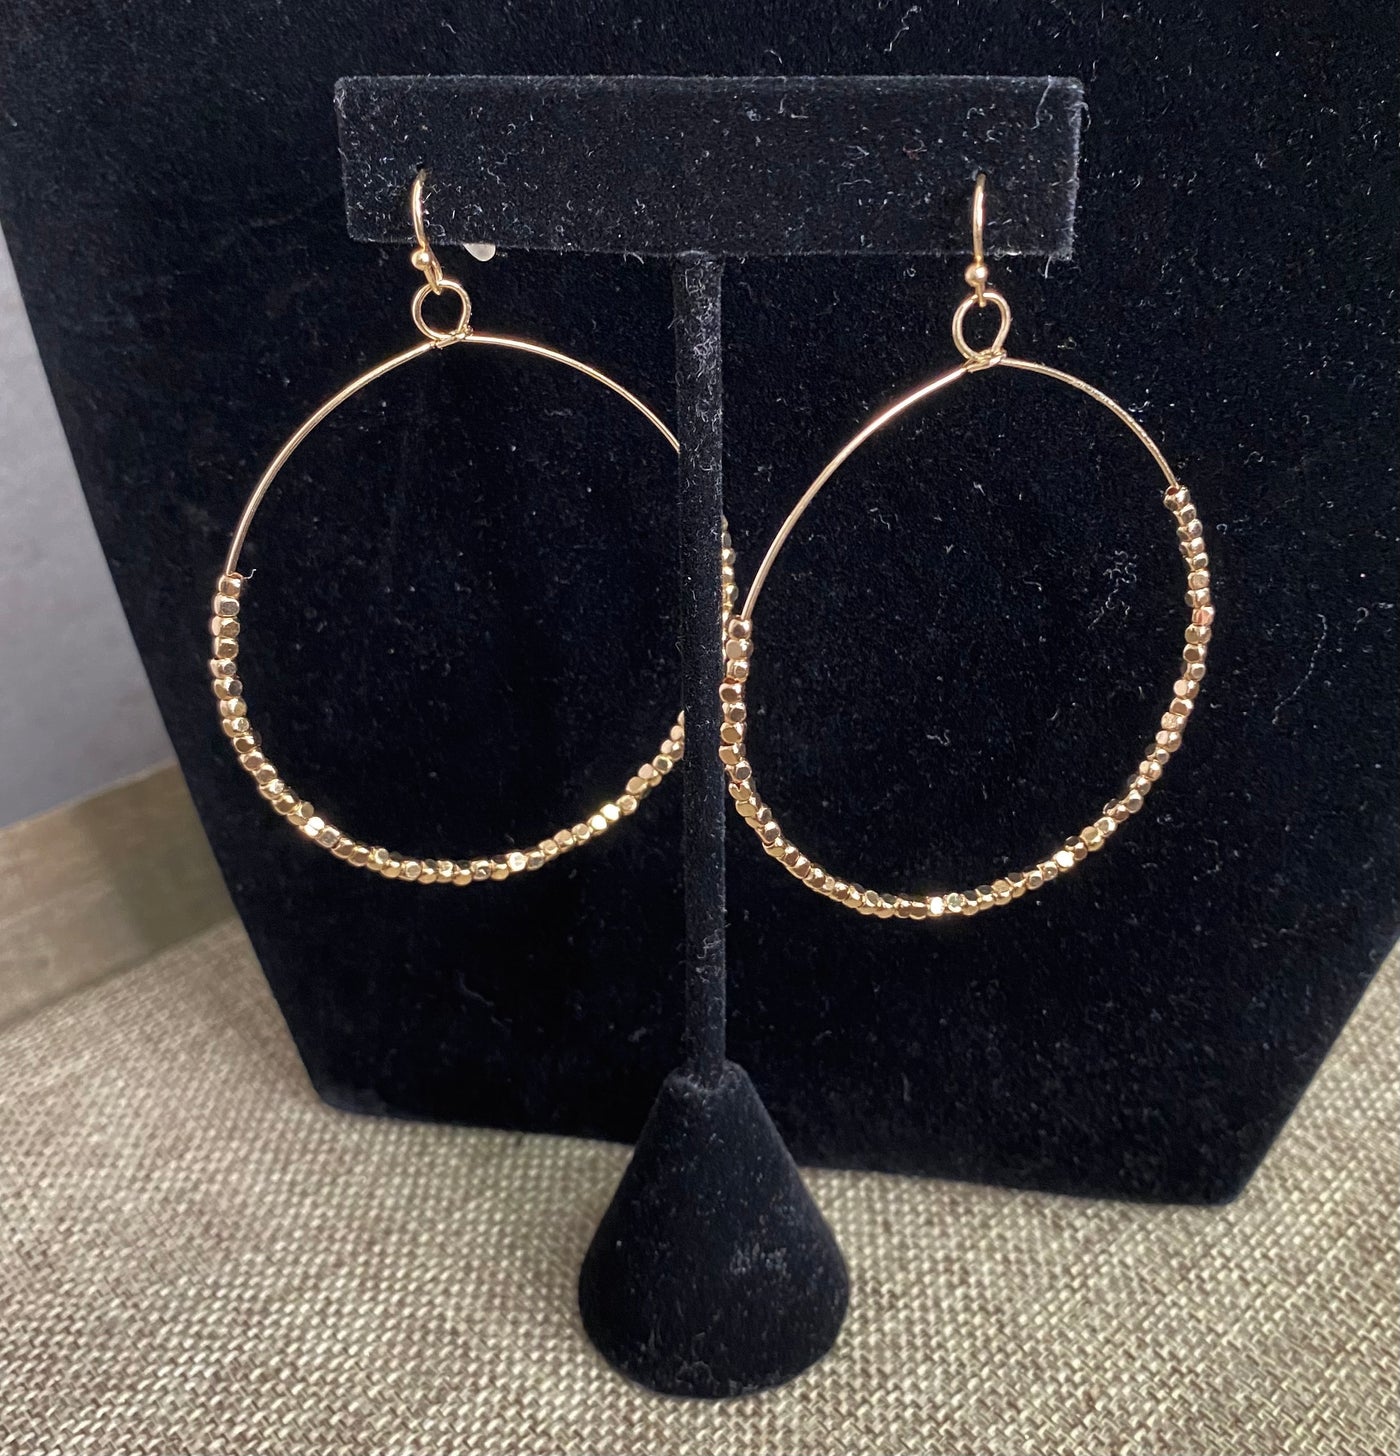 Sassy Circle Earrings with Beads